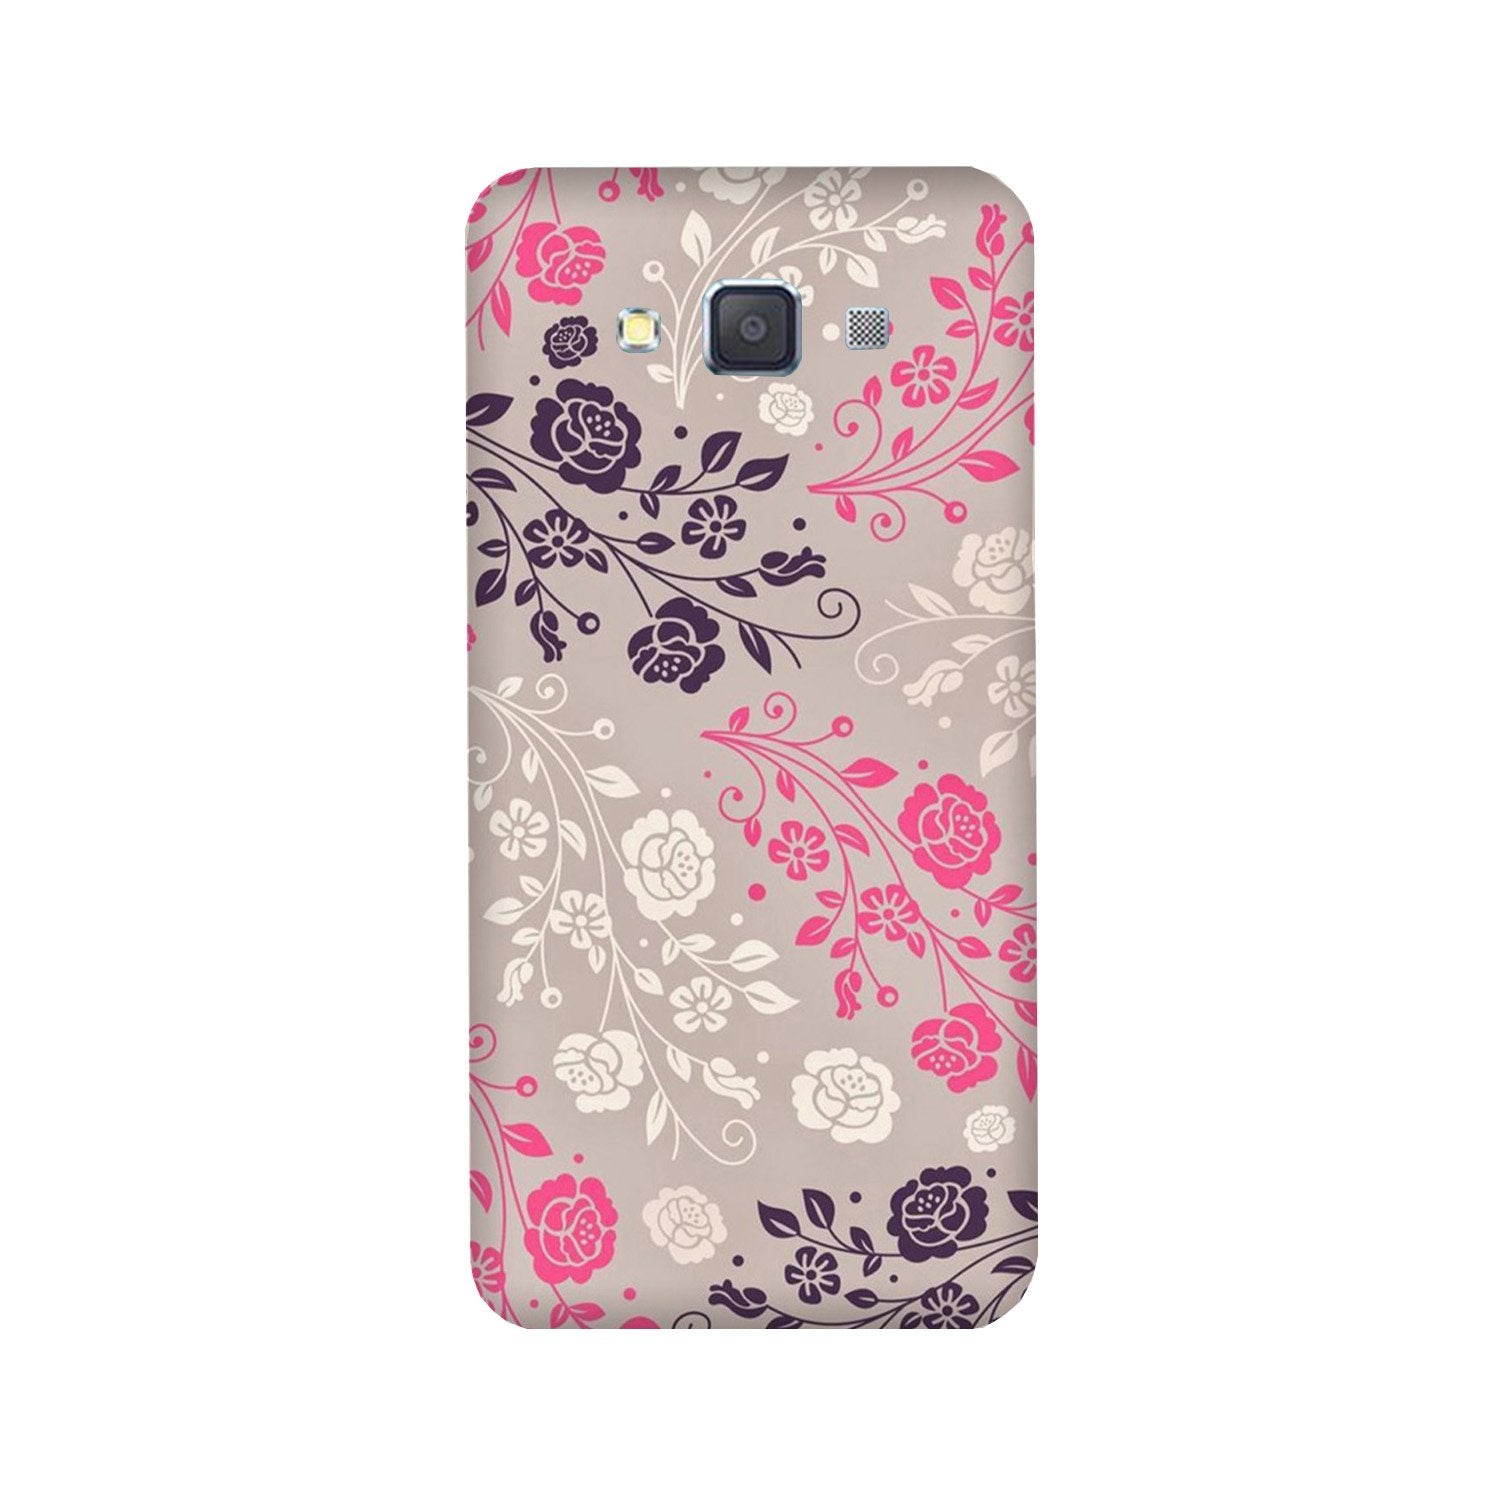 Pattern2 Case for Galaxy ON7/ON7 Pro